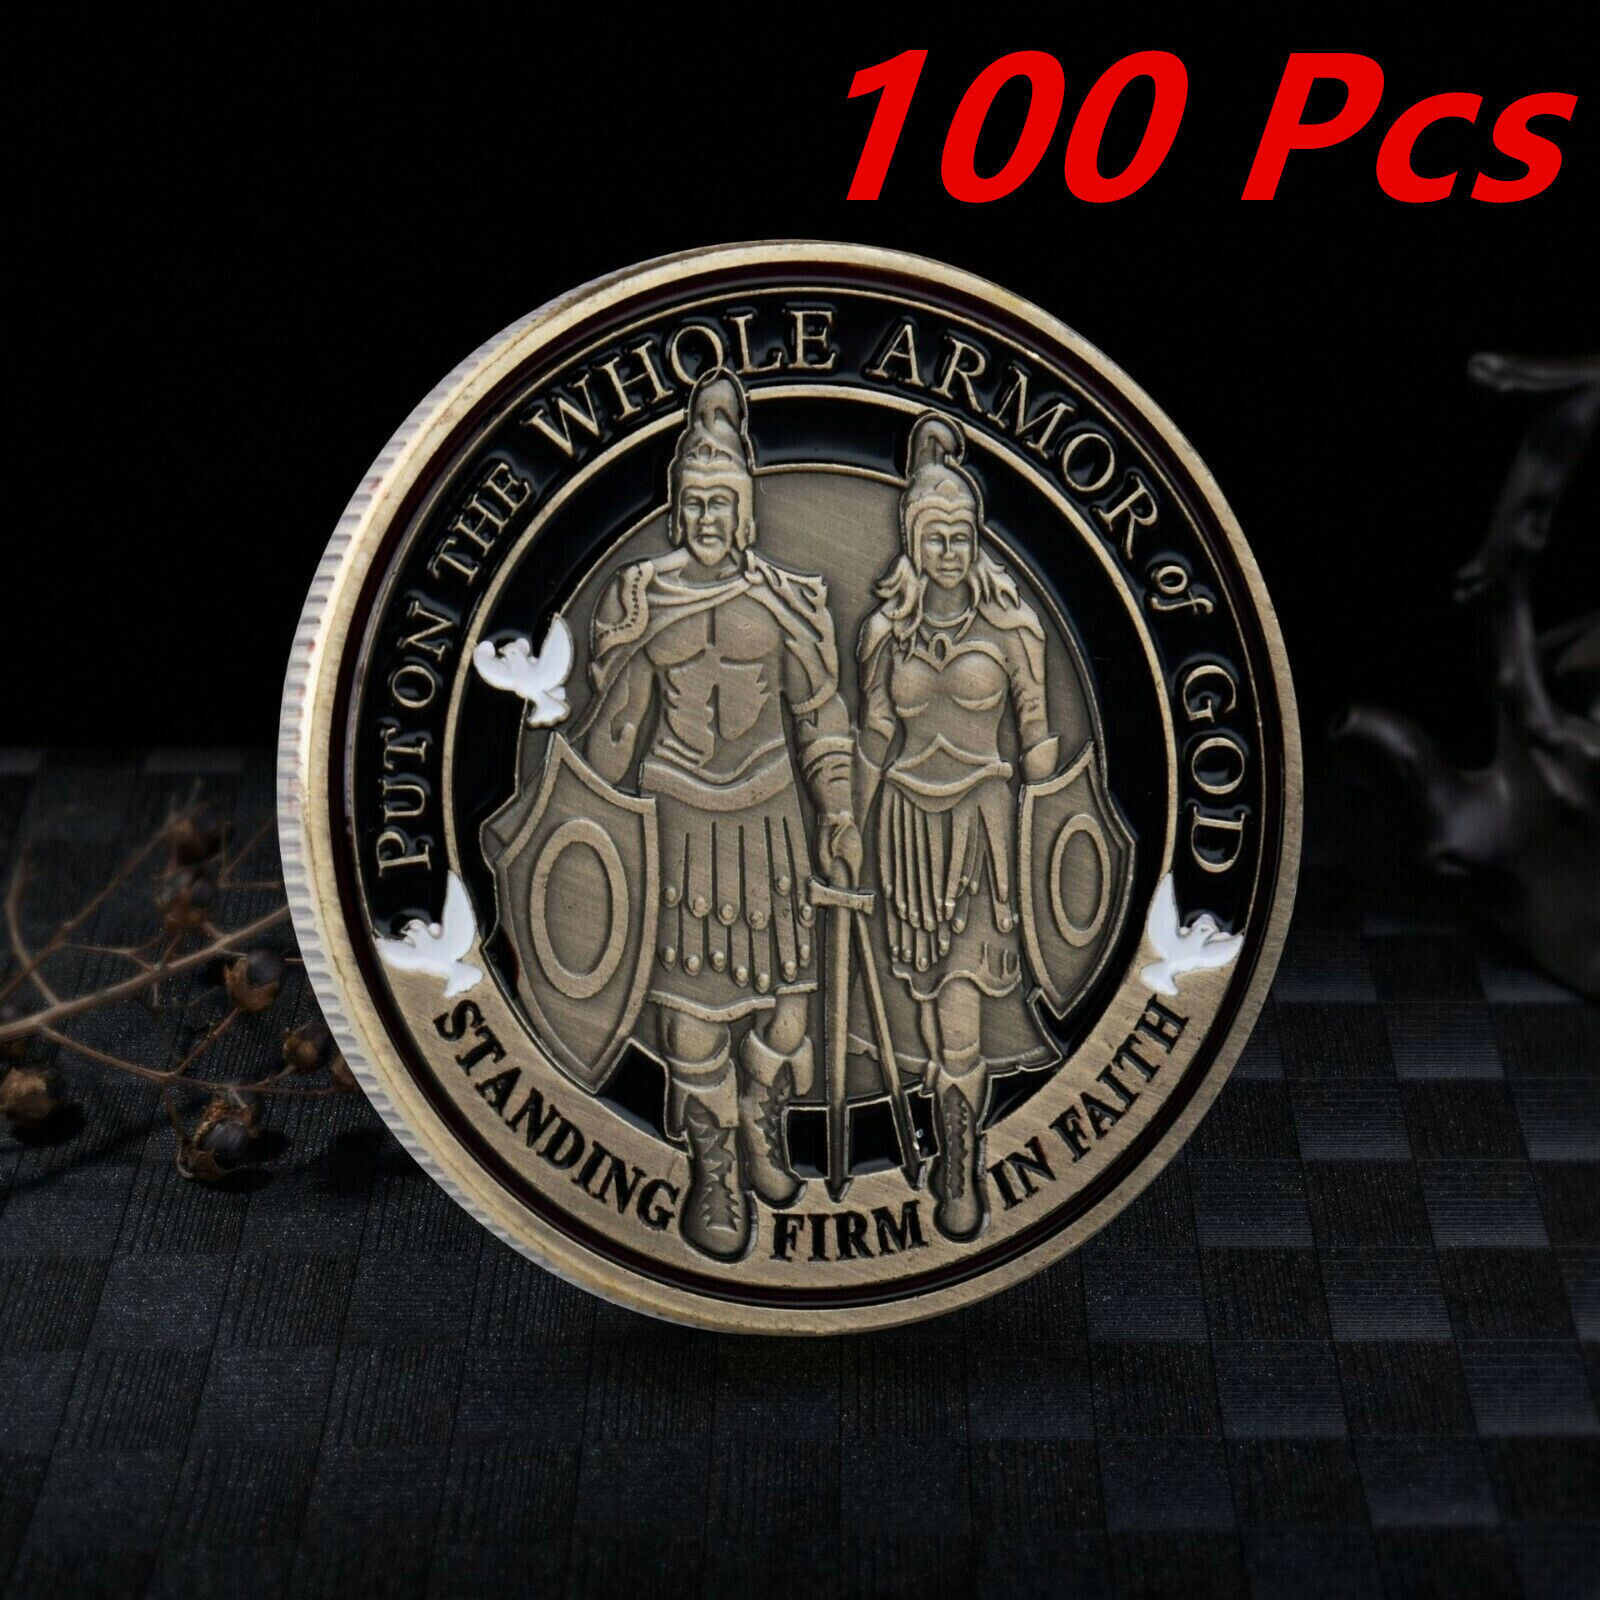 100Pc Put On The Whole Armor Of God Commemorative Challenge Collection Coin Gift